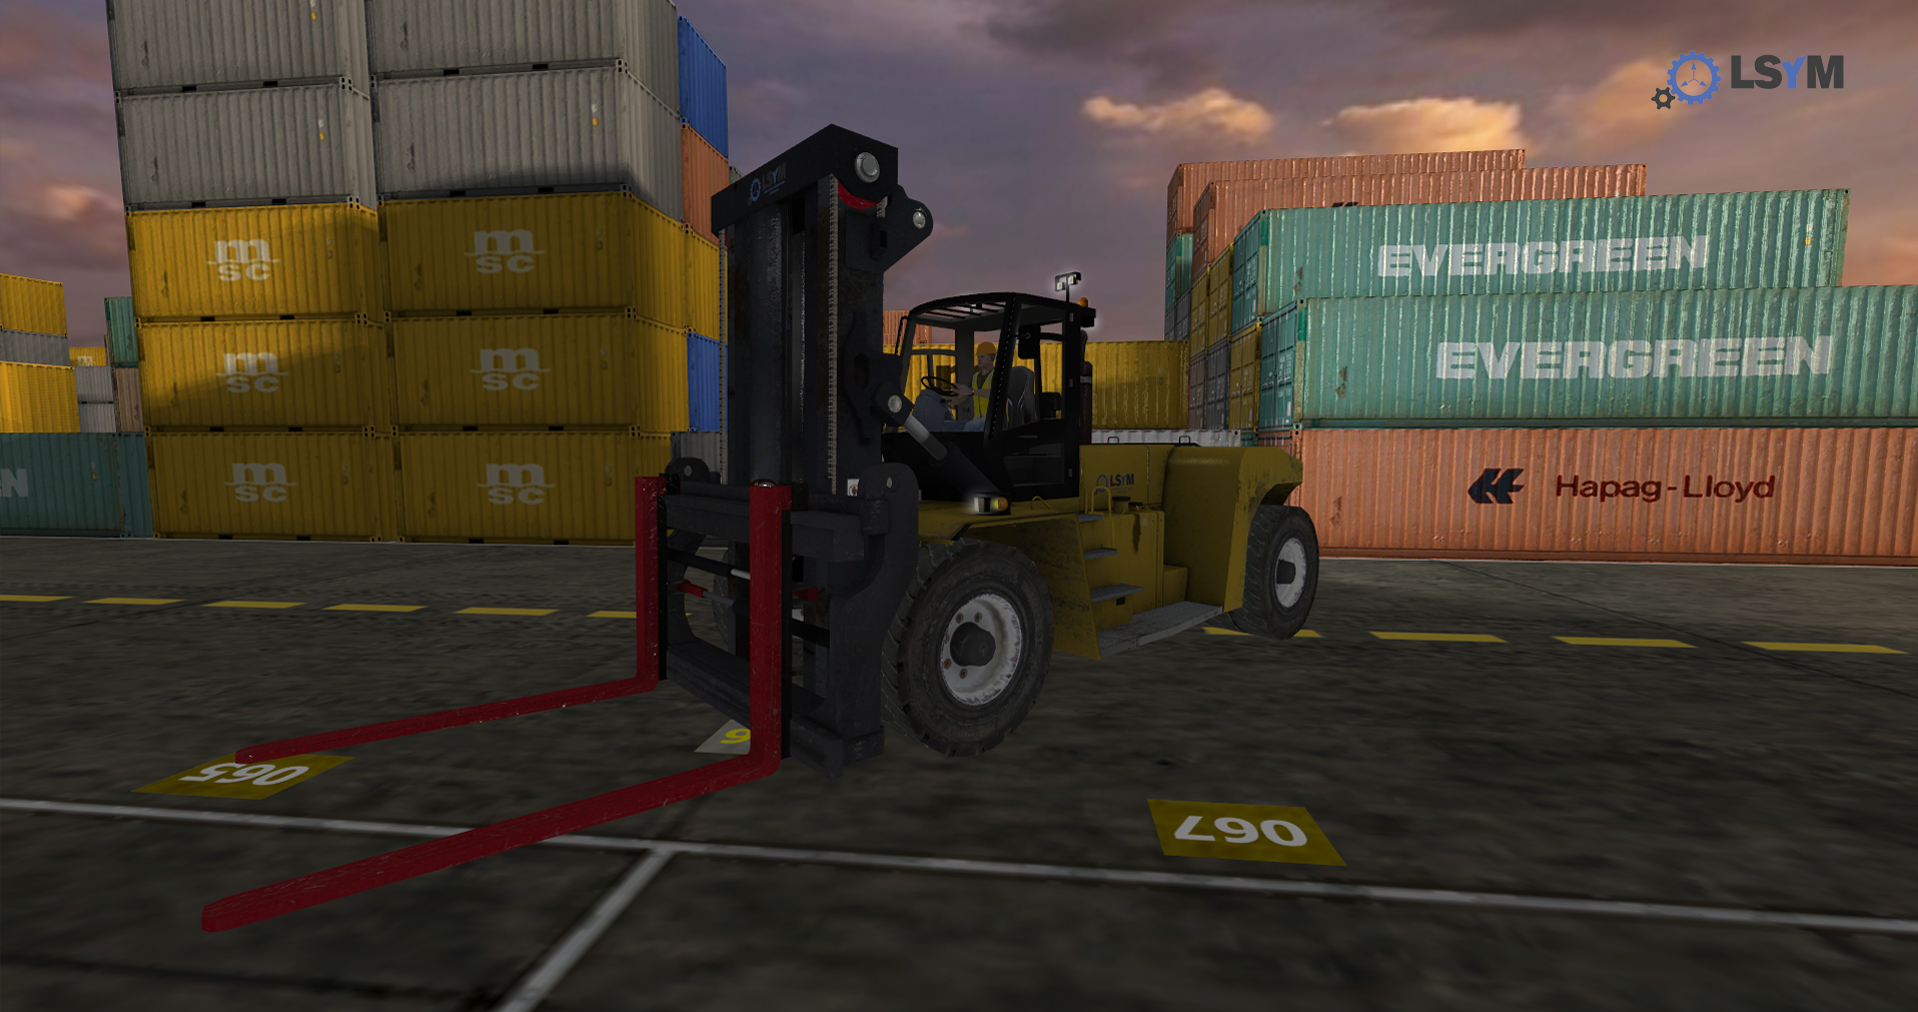 High Capacity Forklift Simulator with containers view